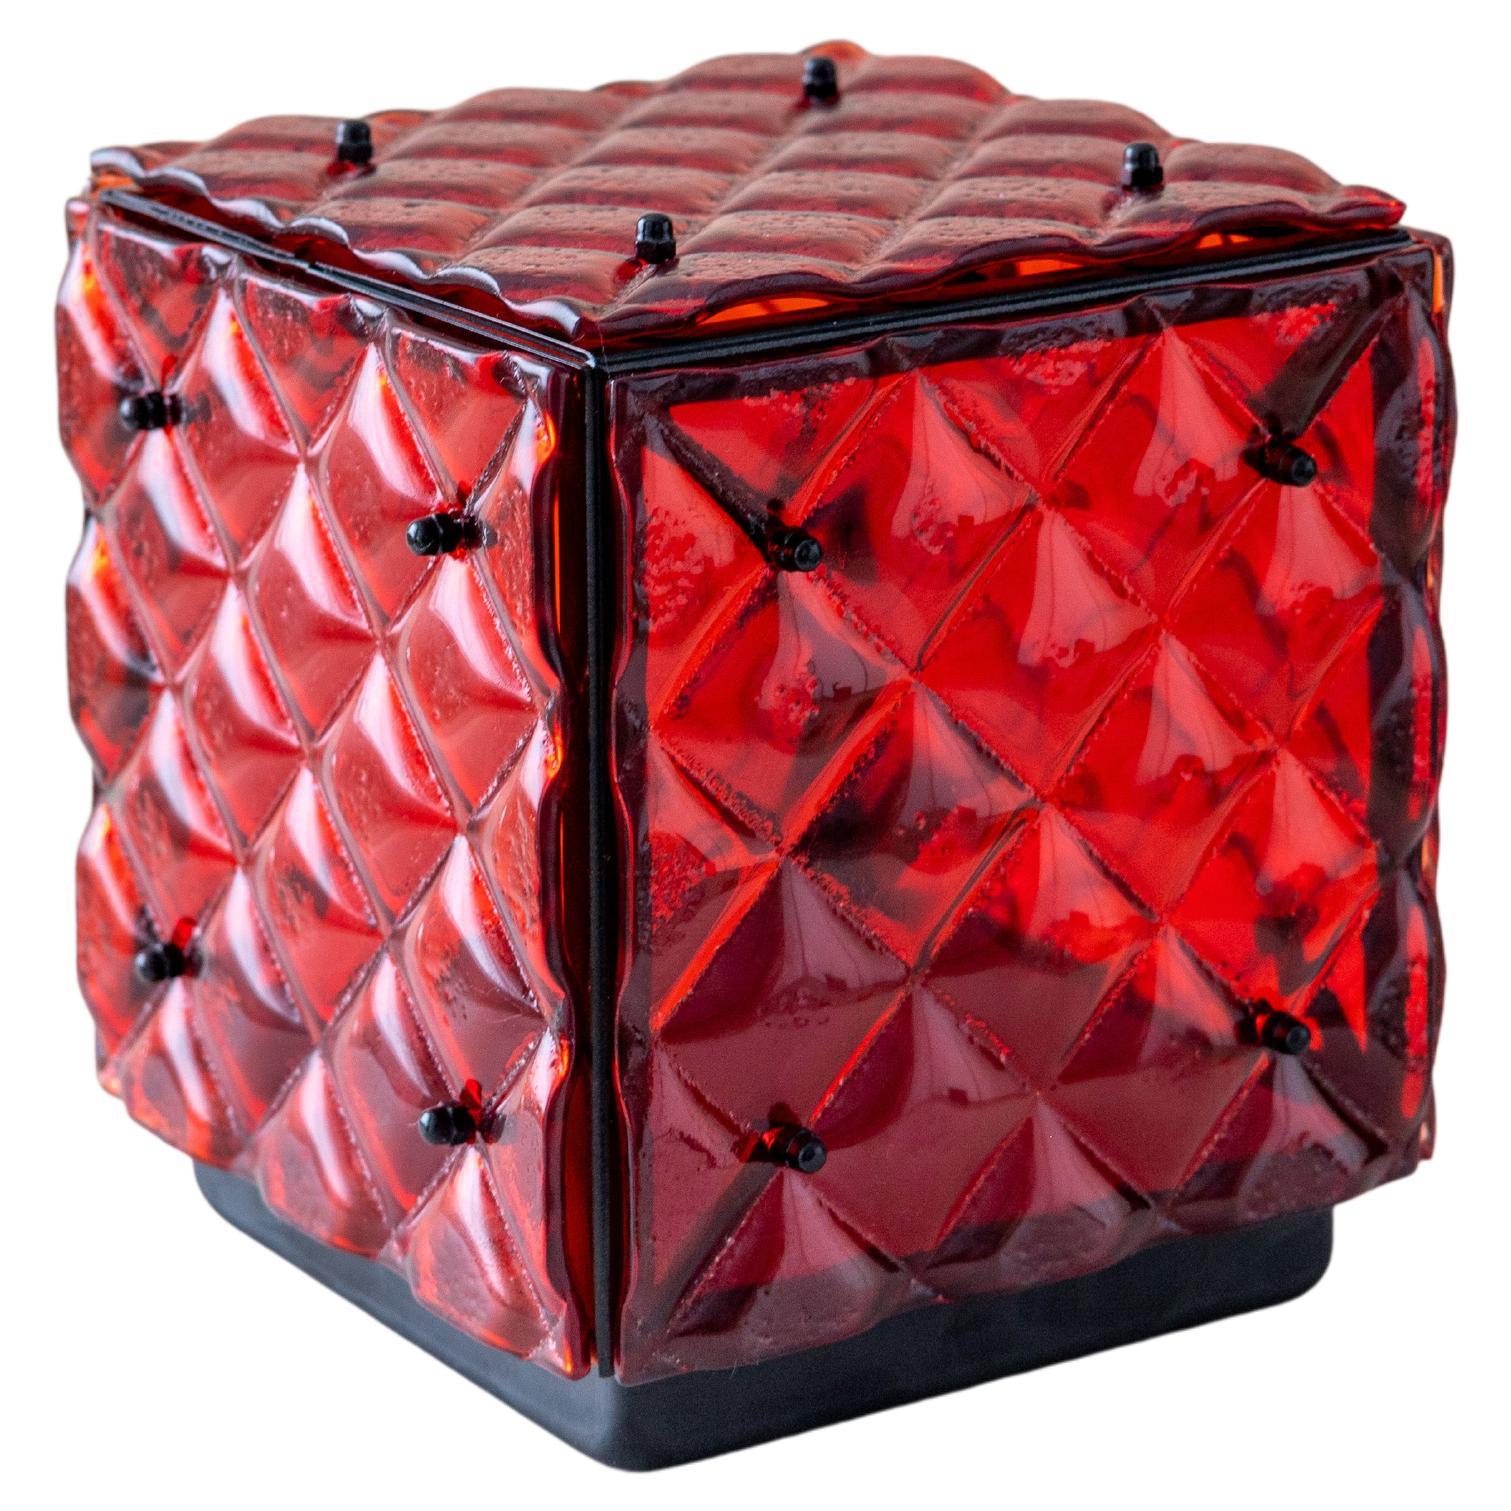 Glass Cube Lamp Red Ambient Light Artisanal Fused Glass Contemporary Design